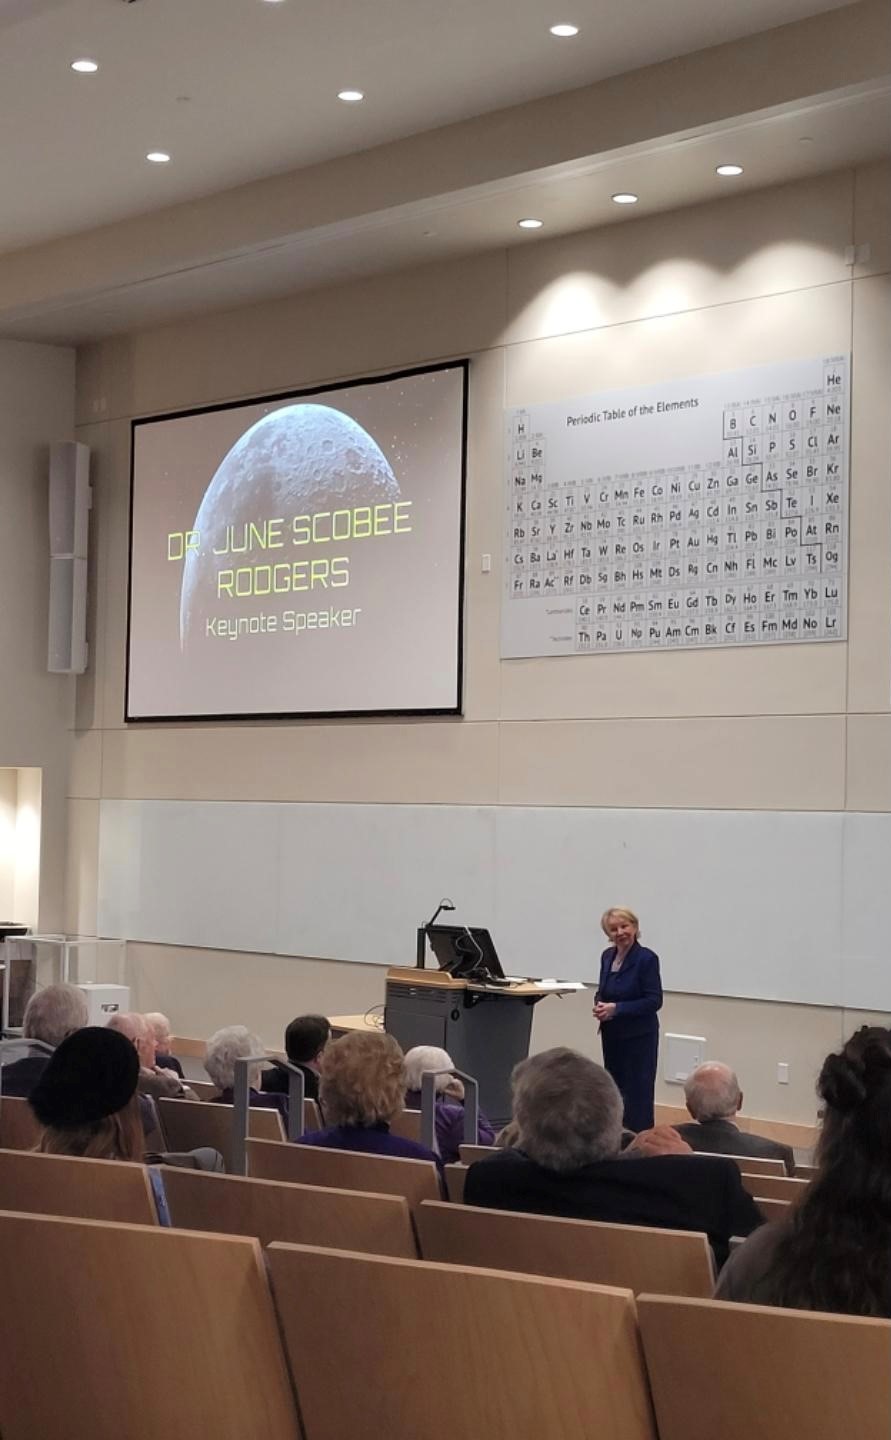 Dr. June Scobee Rodgers speaks in a lecture hall